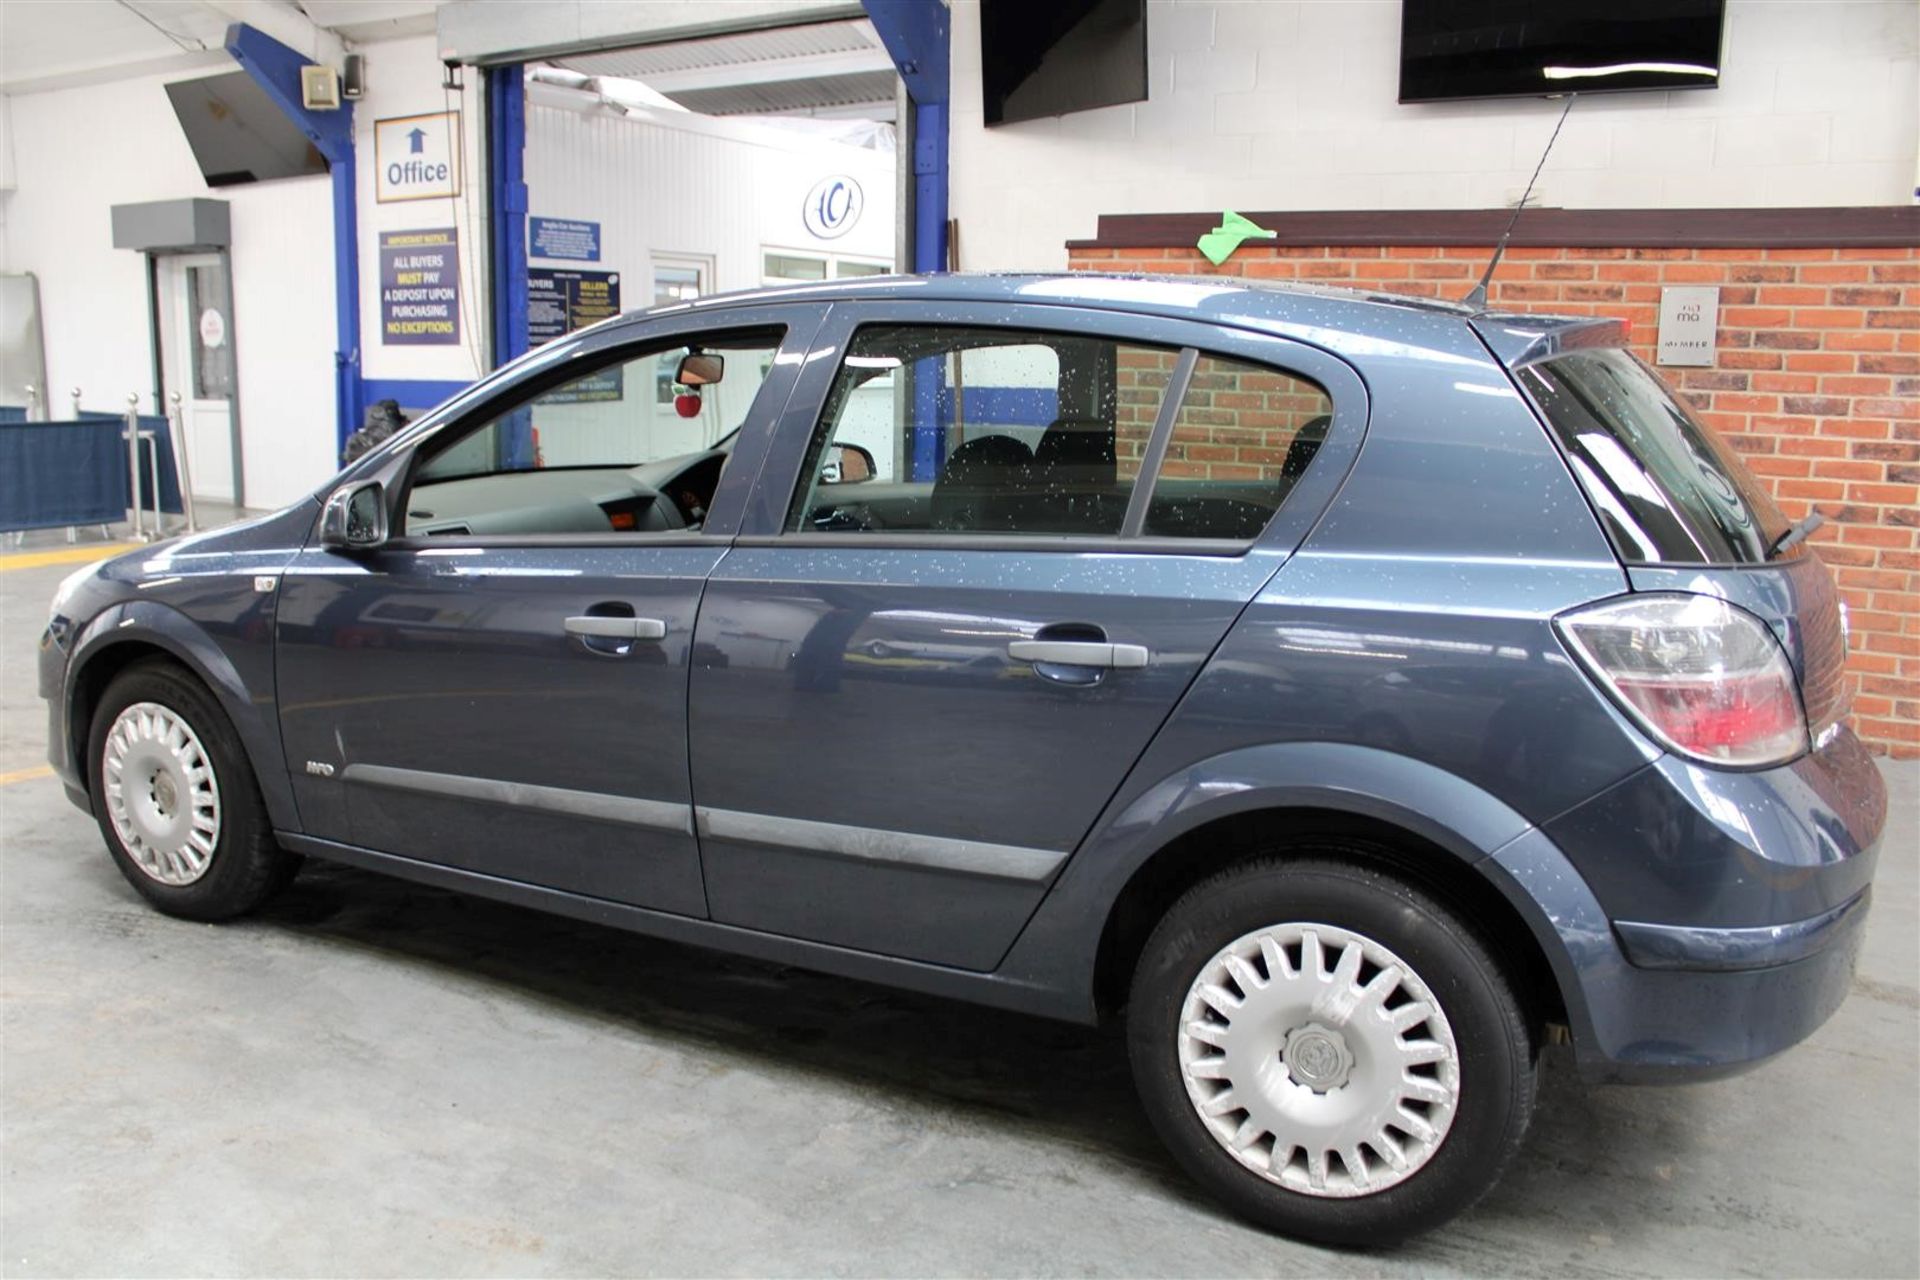 57 07 Vauxhall Astra Life - Image 3 of 32